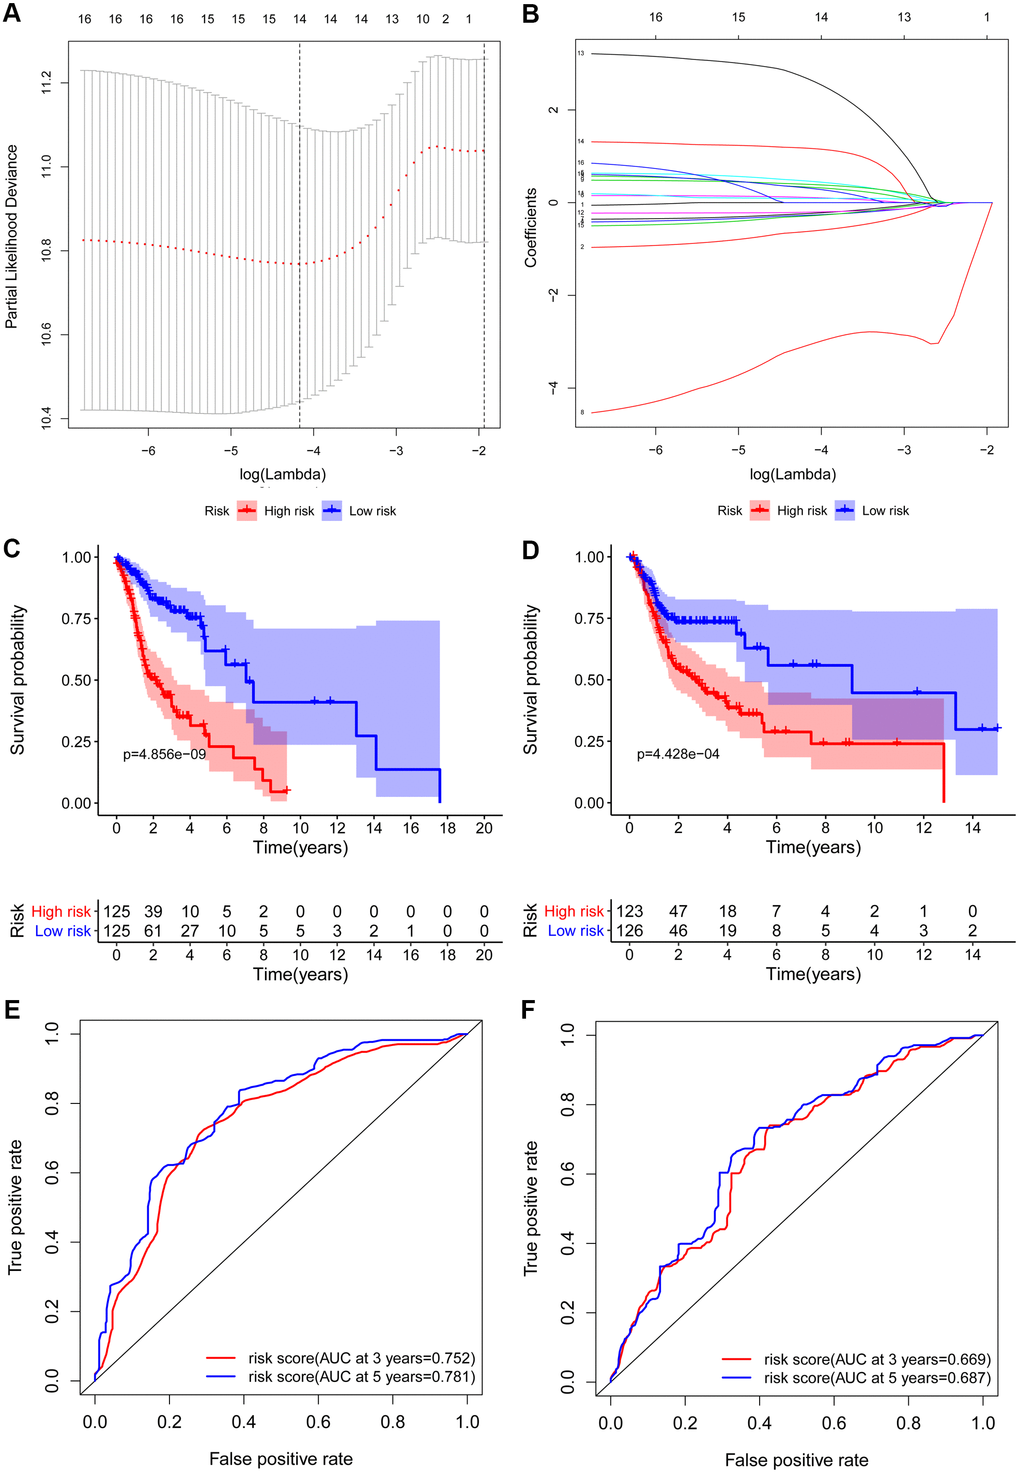 Construction and validation of the prognostic risk model in HNSCC patients. (A) Screening of optimal parameter (lambda) at which the dotted vertical lines were drawn. (B) Lasso coefficient profiles of the candidate RBPs with non-zero coefficients determined by the optimal lambda. Kaplan-Meier plot of the high-risk (red) and low-risk (blue) HNSCC patients in the training group (C) and testing group (D). The 3-year (red) and 5-year (blue) ROC curves in the training group (E) and testing group (F) of HNSCC patients.